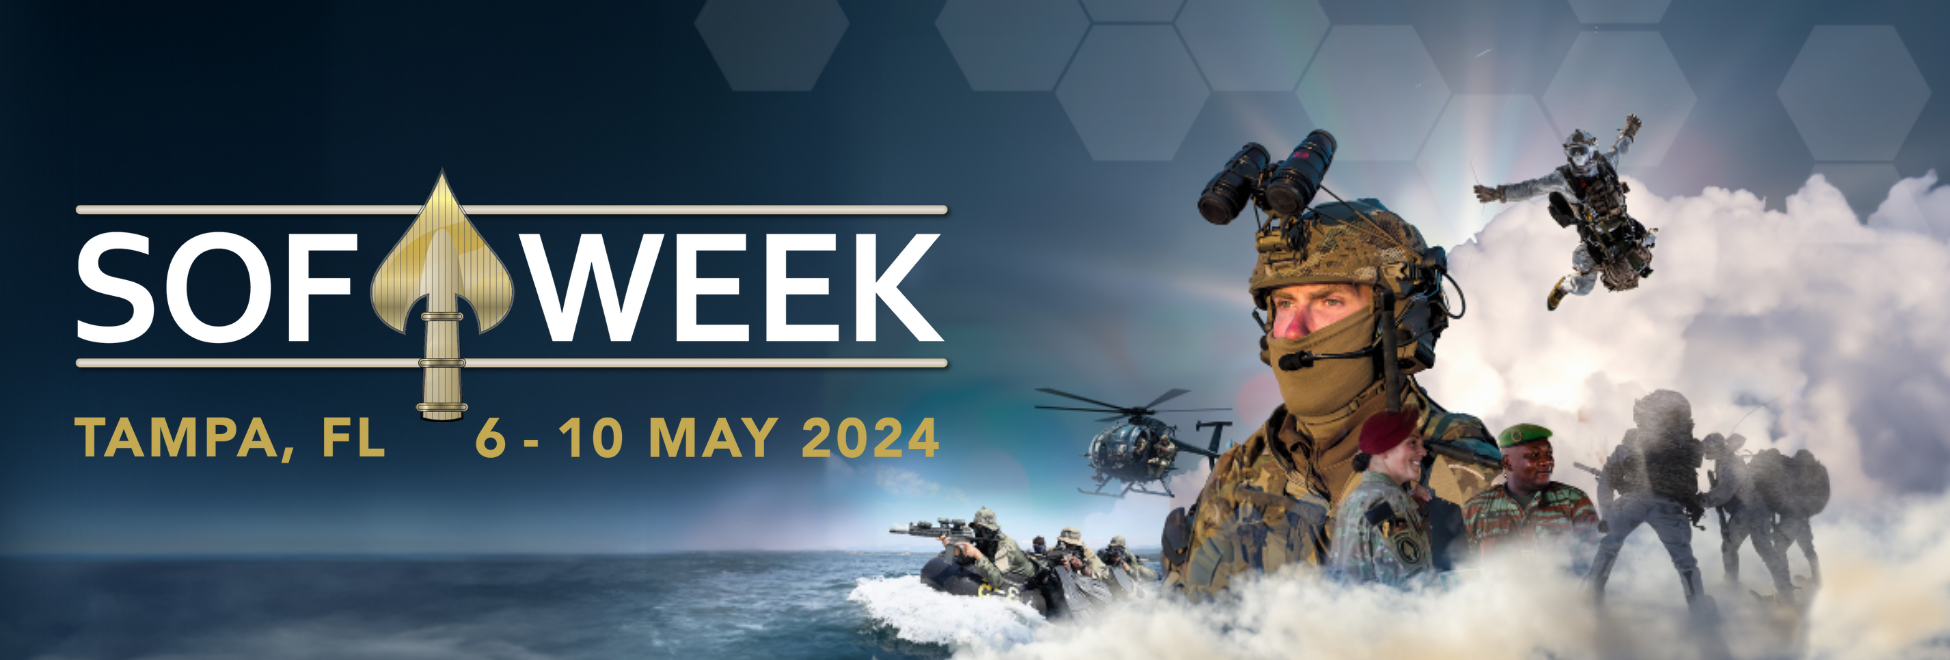 Get ready for sof week 2024 banner